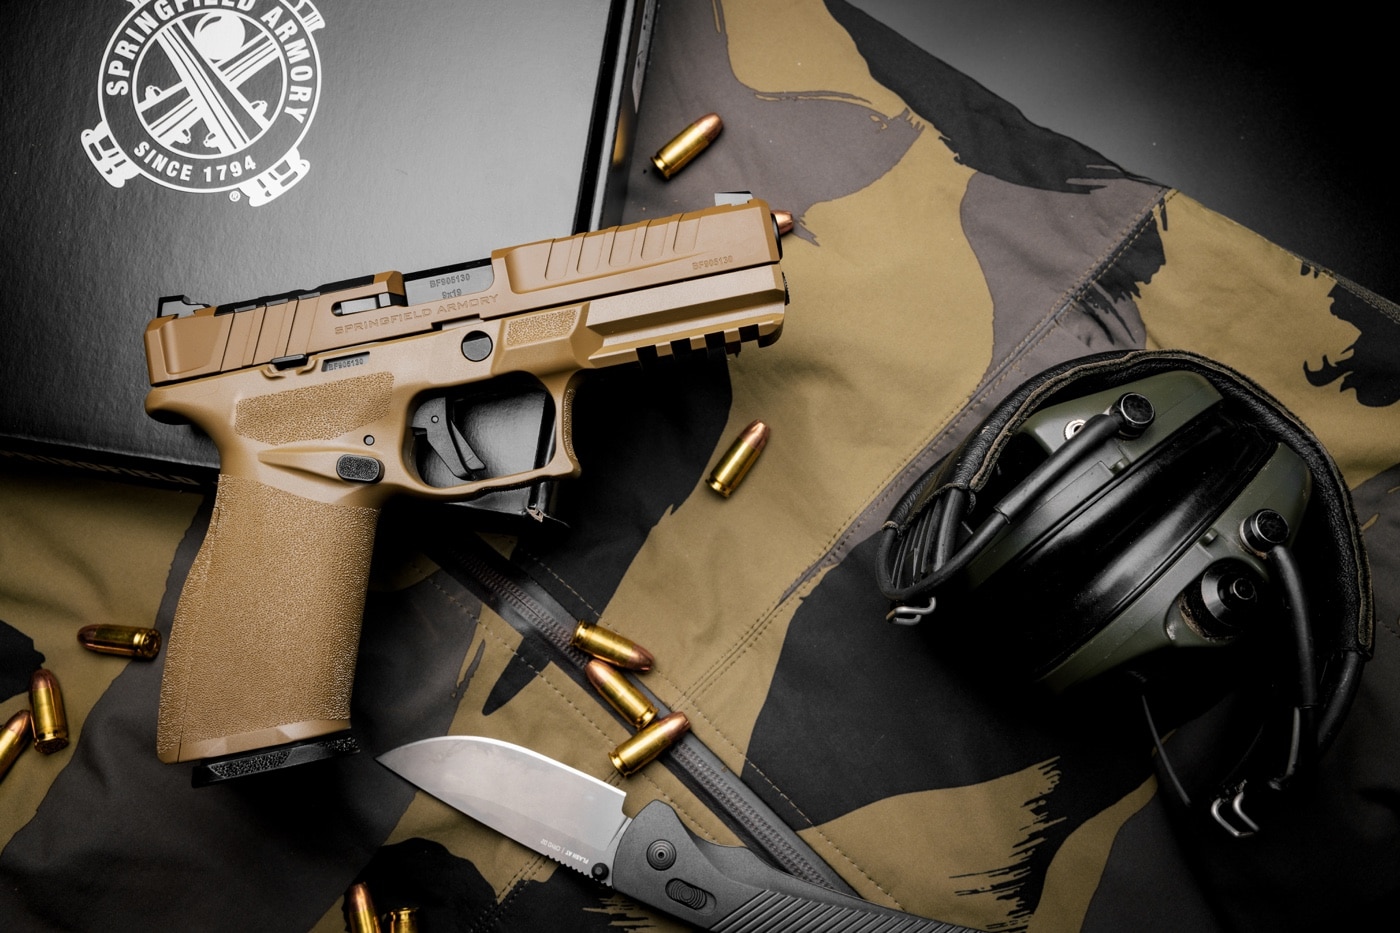 In this digital image, we see the new Springfield Echelon with the Desert FDE finish. It is a complete finish with the Desert FDE uniformly applied.